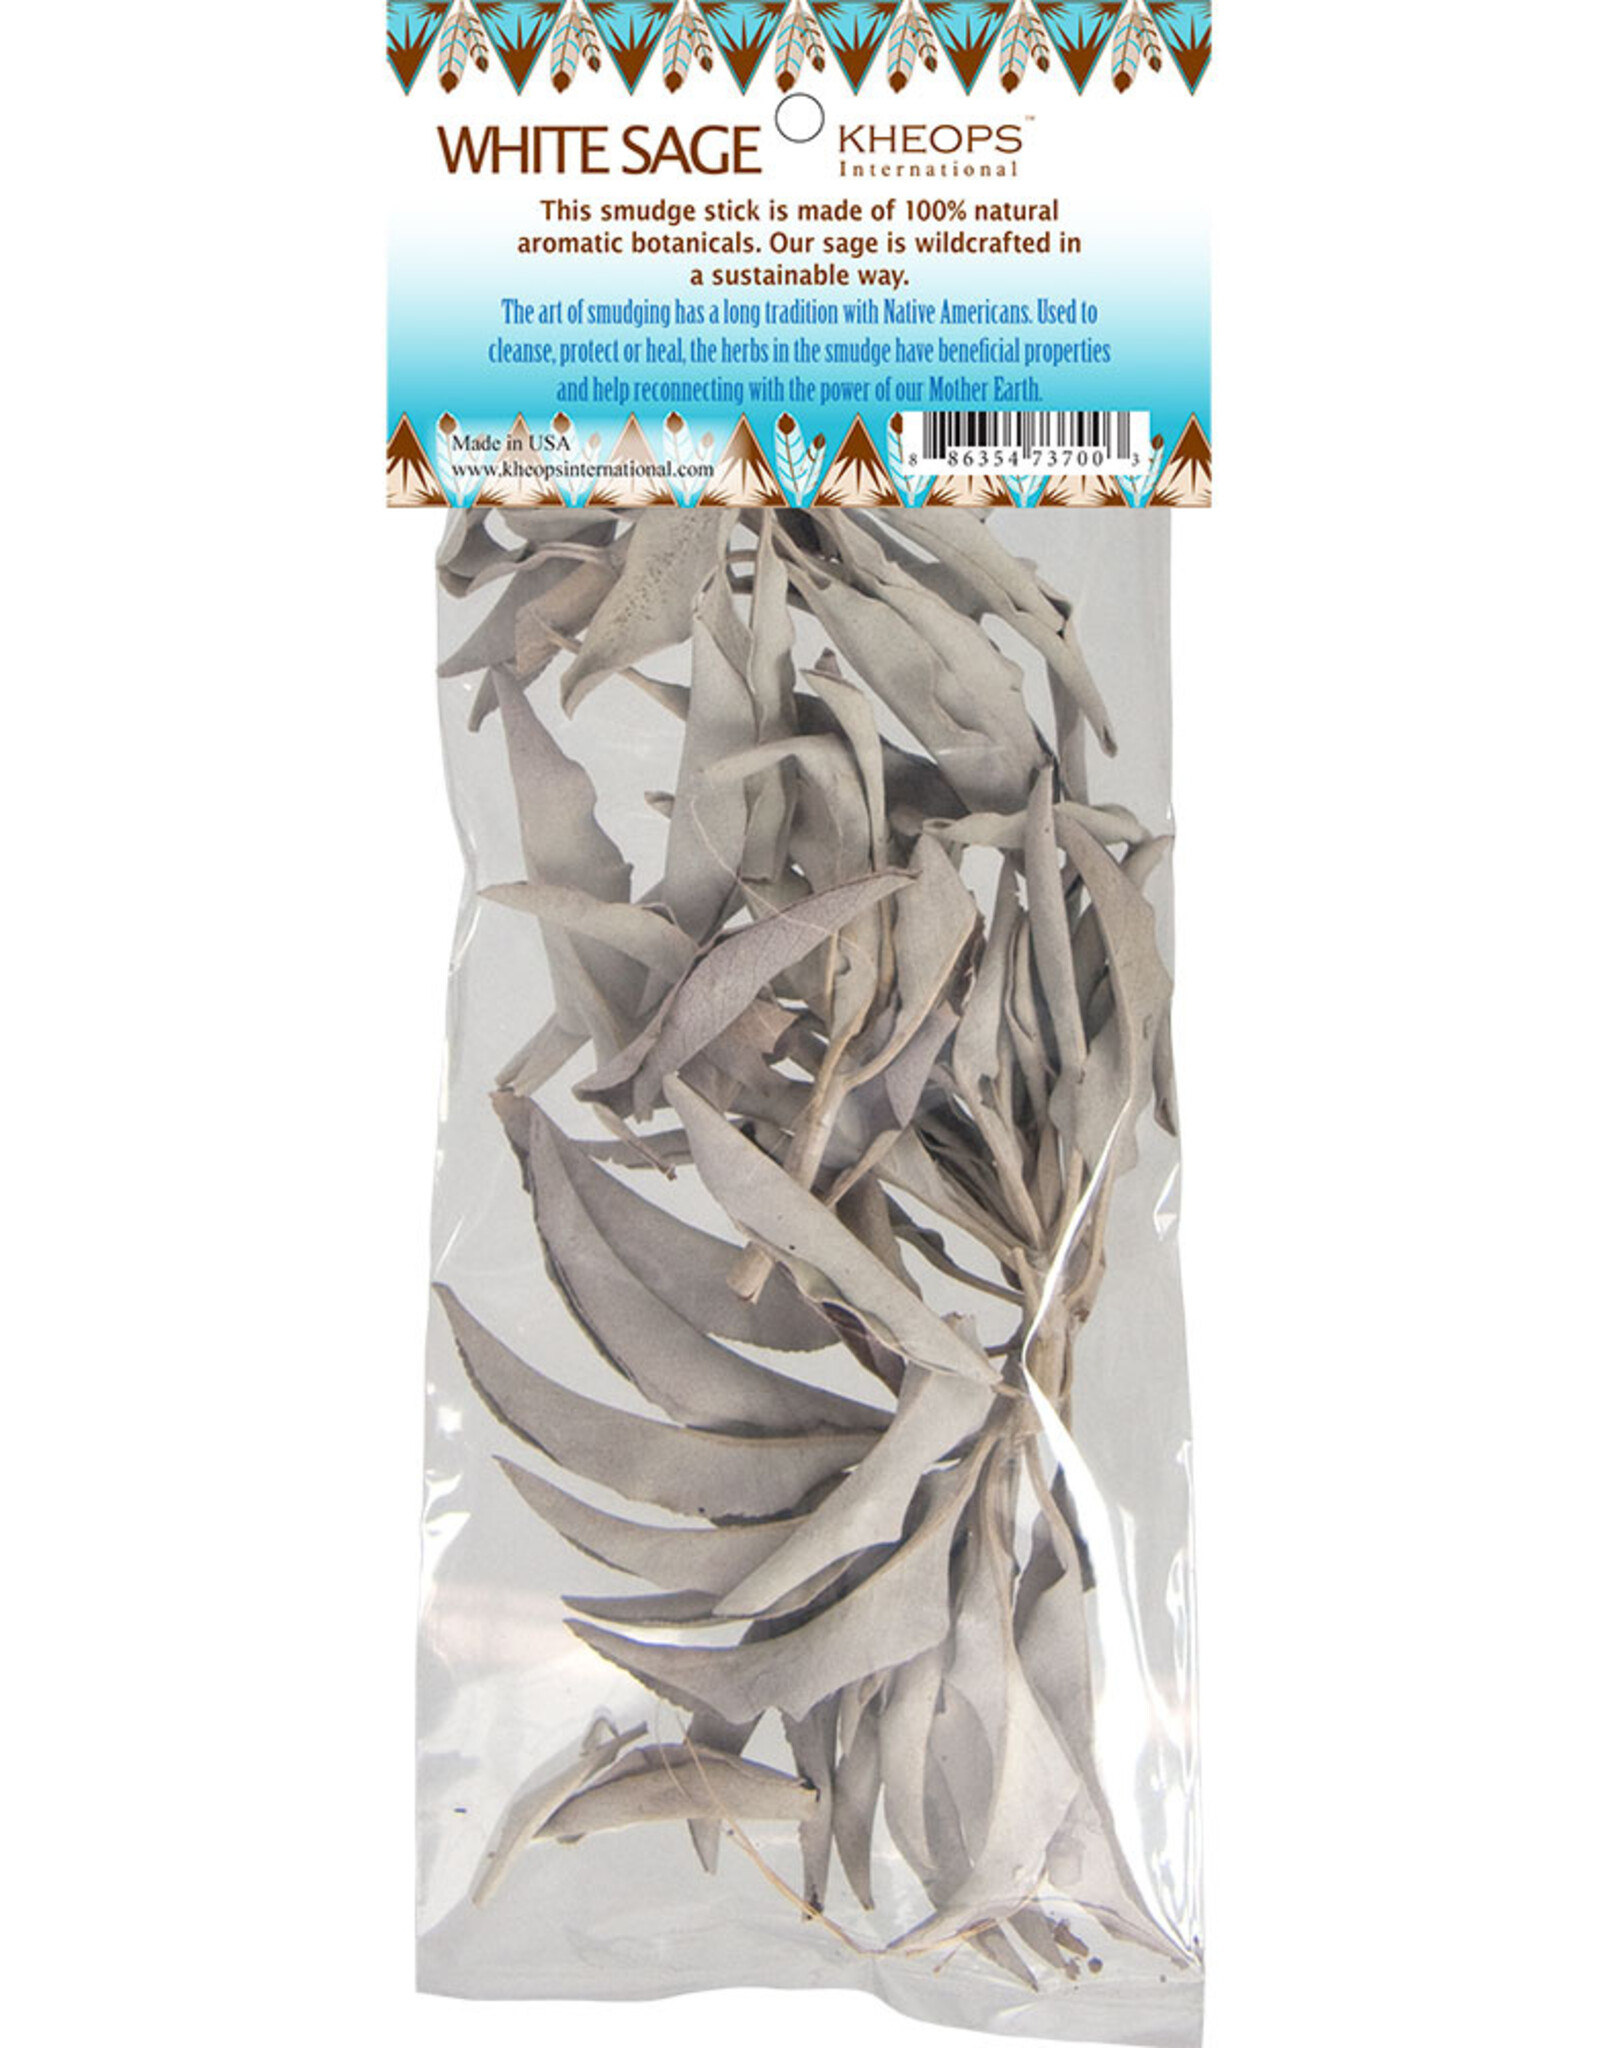 SMUDGING-CALIFORNIA WHITE SAGE/CLUSTERS(1 OZ)